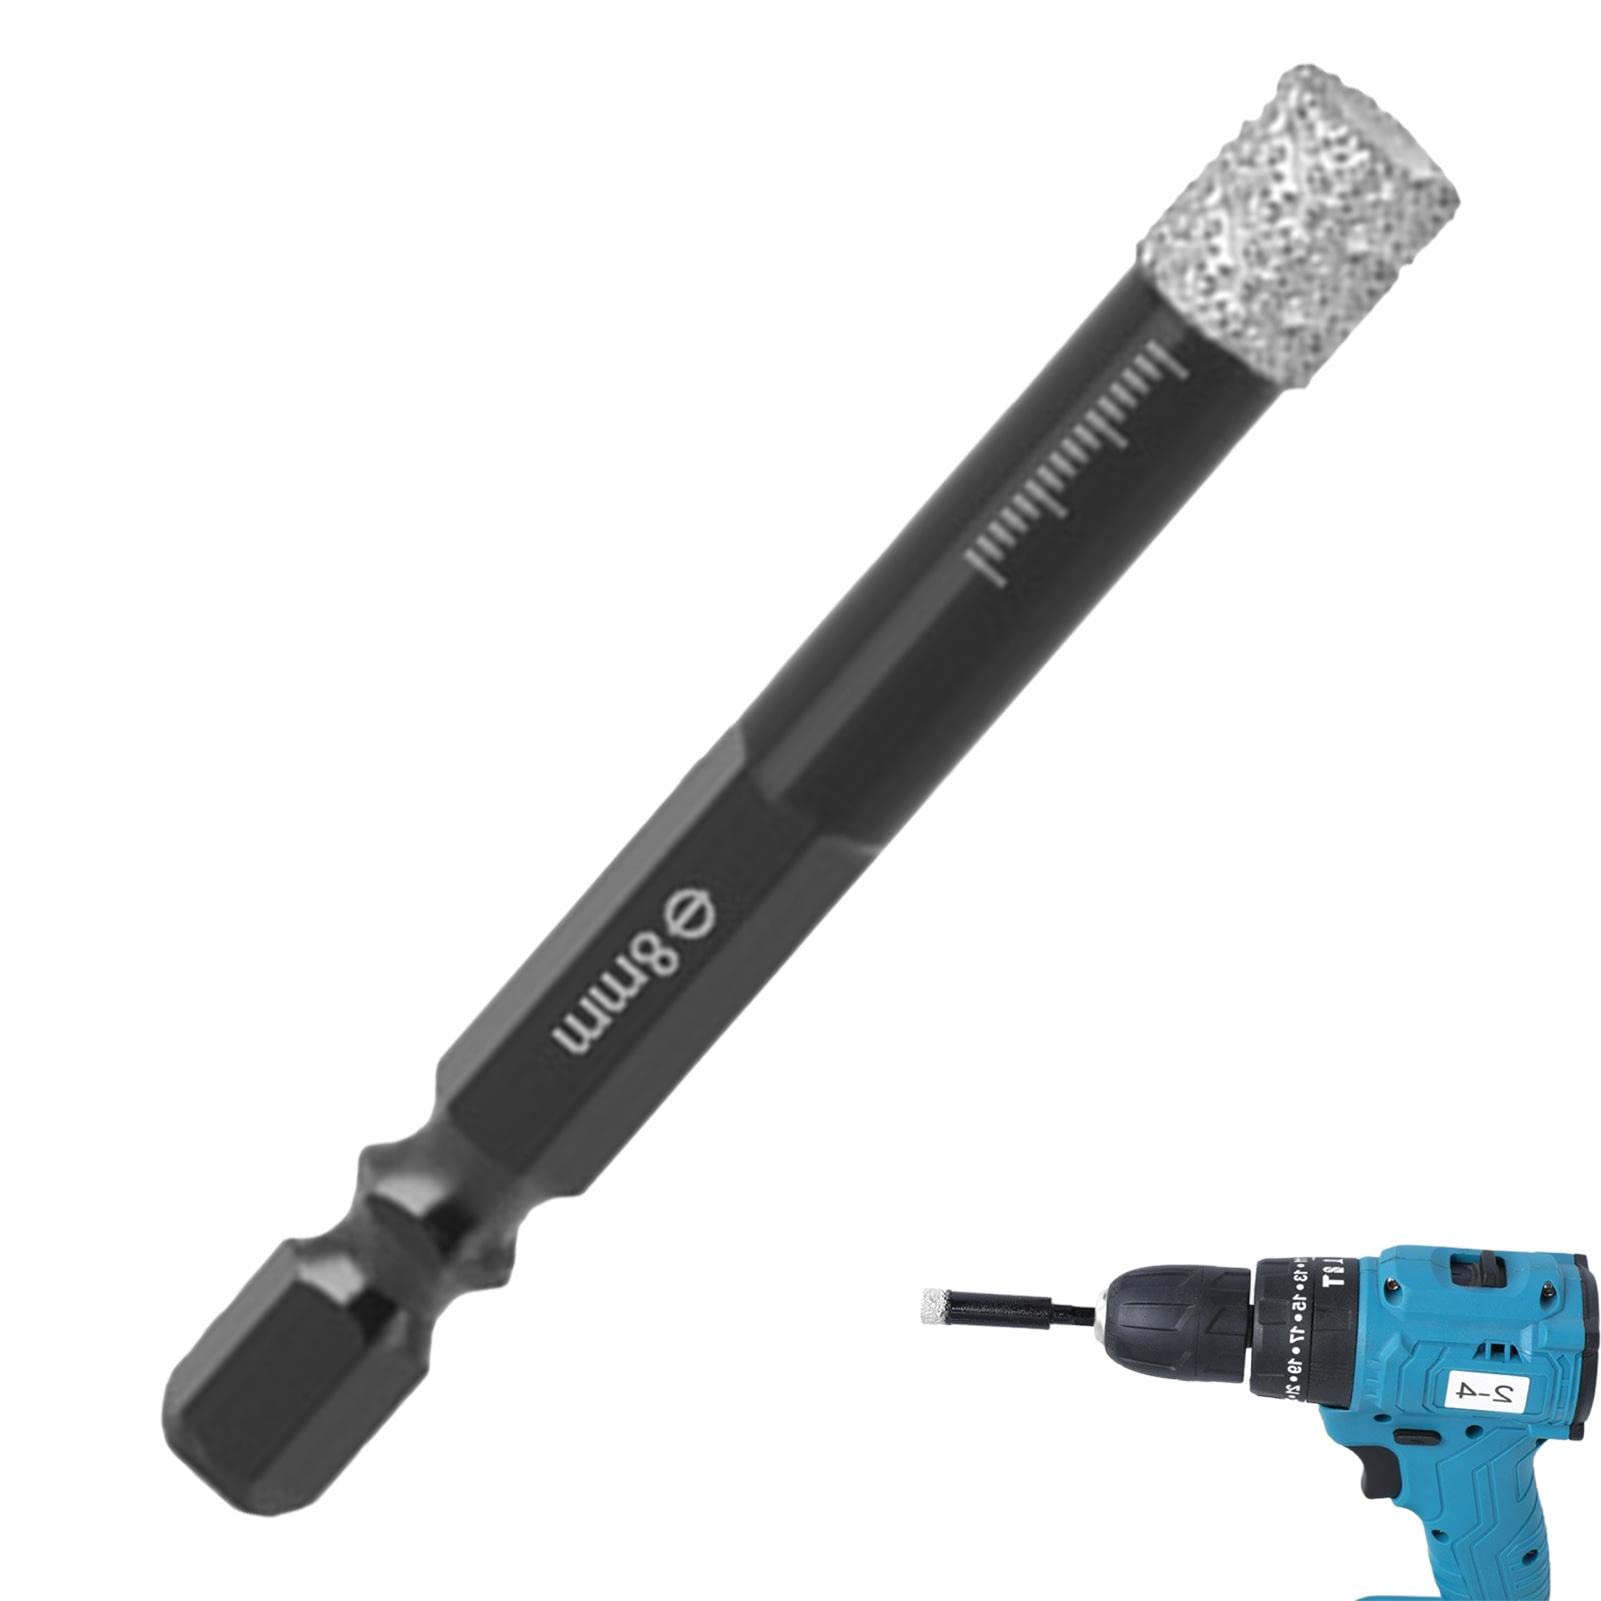 Diamond Hole Drill, Diamond Hole Saw | Ceramic Tile Drill Bit, Power Drill Parts Accessories, Available in 0.2/0.3/0.39/0.47/0.57/0.55 inches (6/8/10/12/14 mm) Available